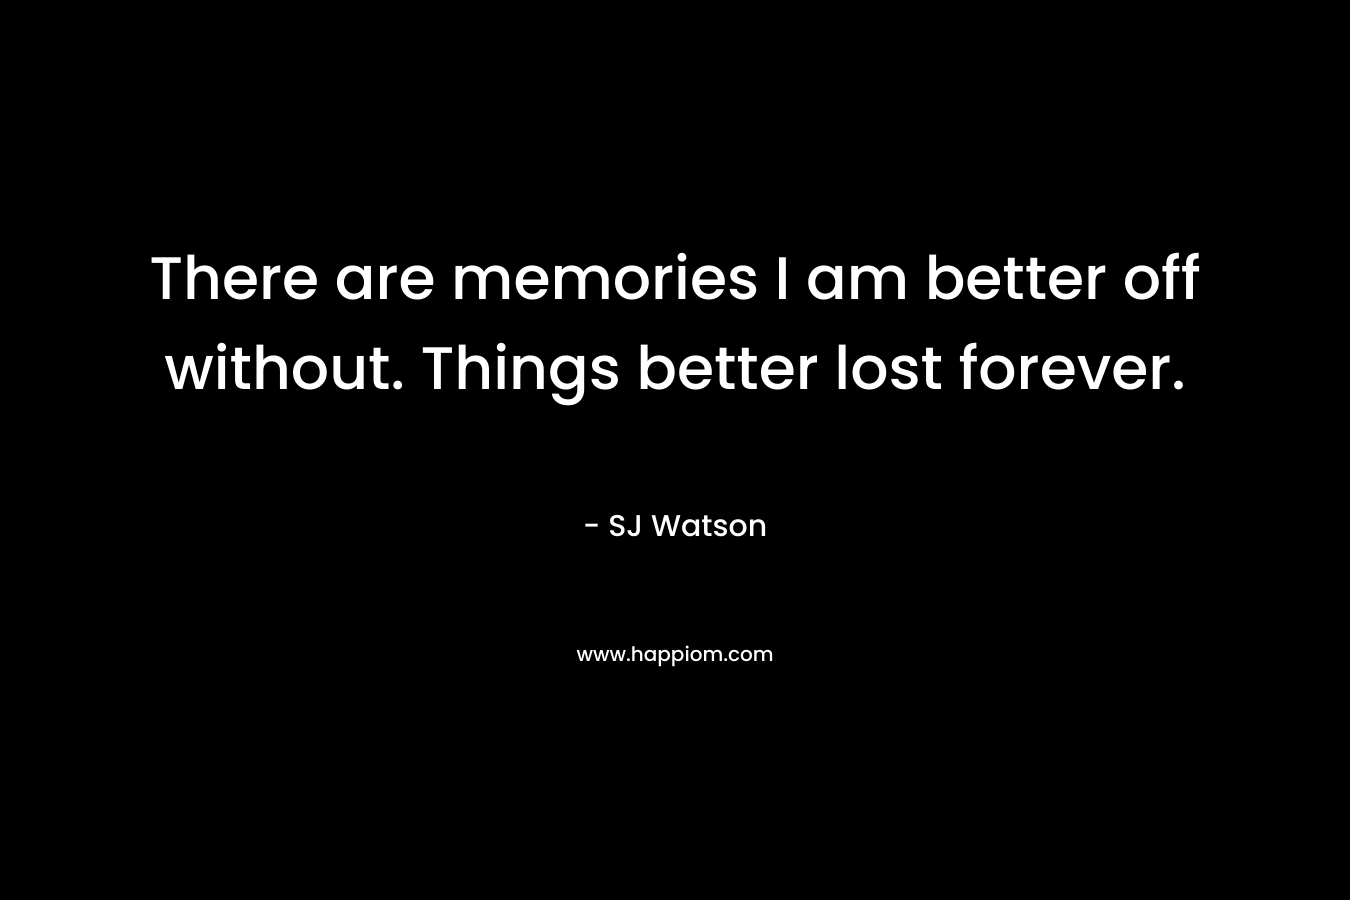 There are memories I am better off without. Things better lost forever.